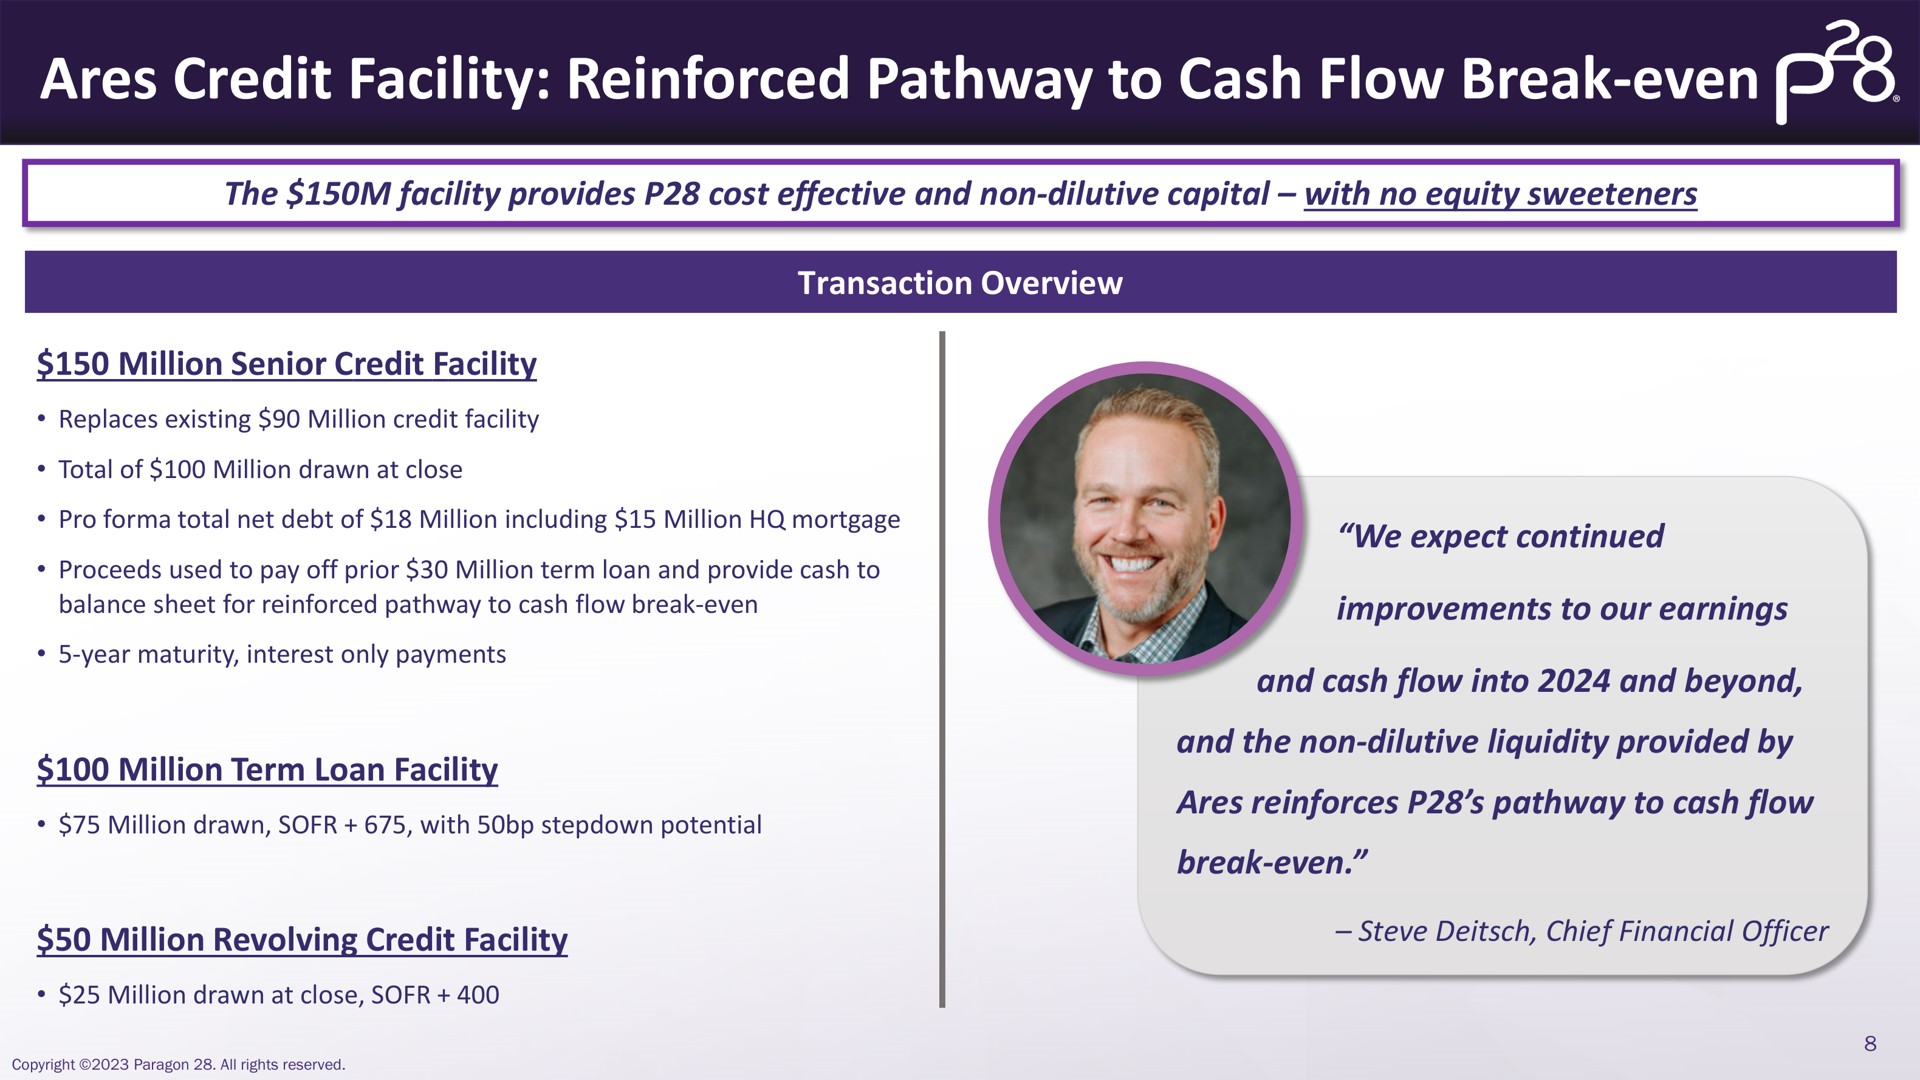 ares credit facility reinforced pathway to cash flow break even million revolving chief financial | Paragon28